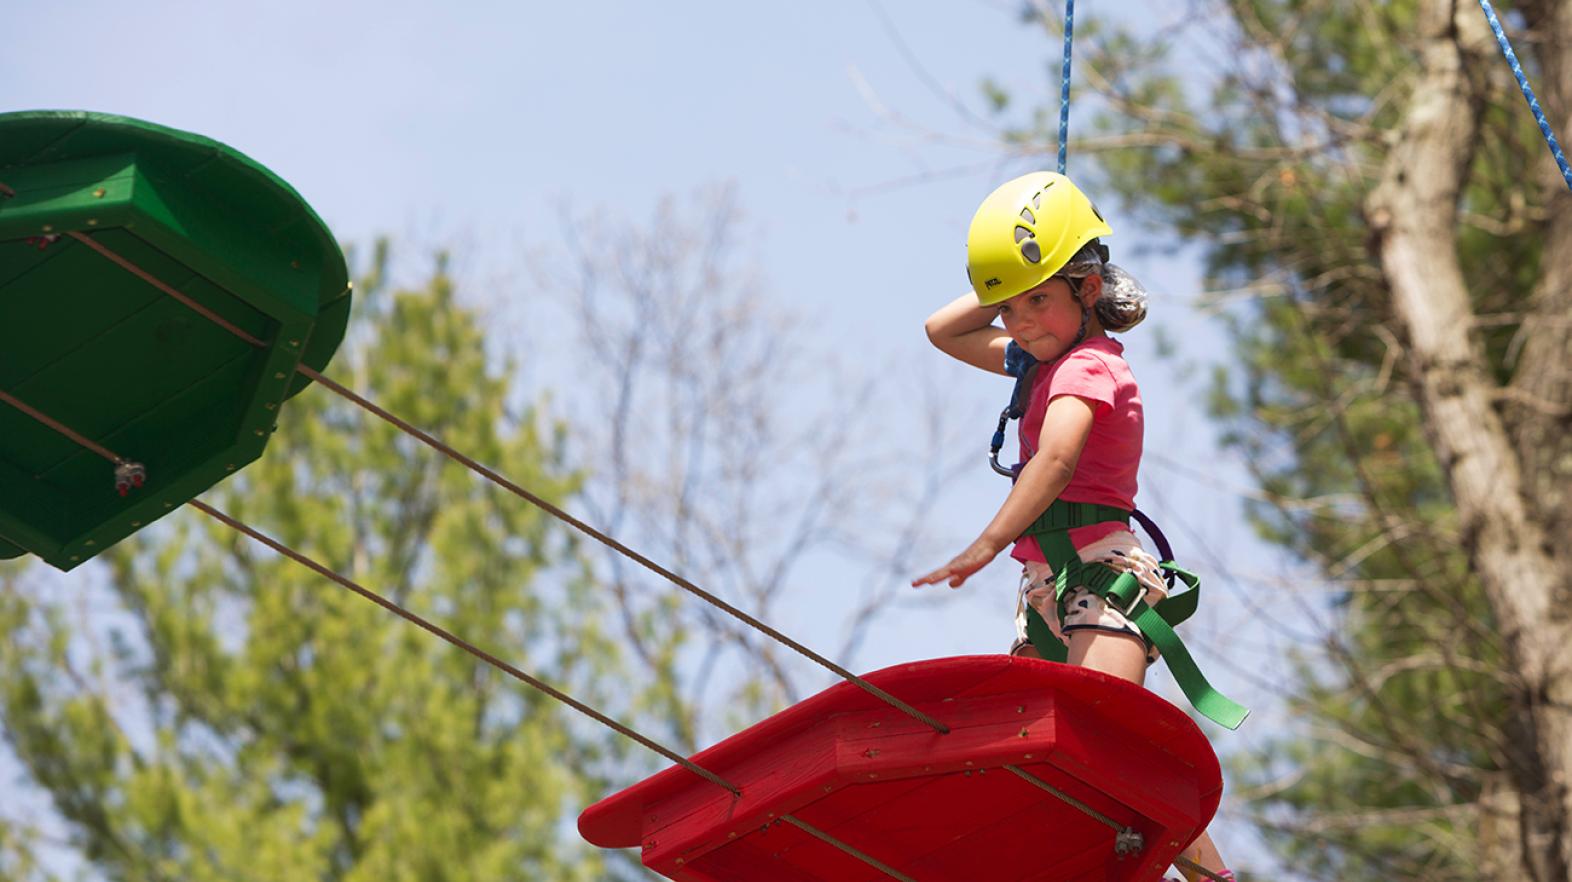 Young girl focusing on the challenge course at East Campus